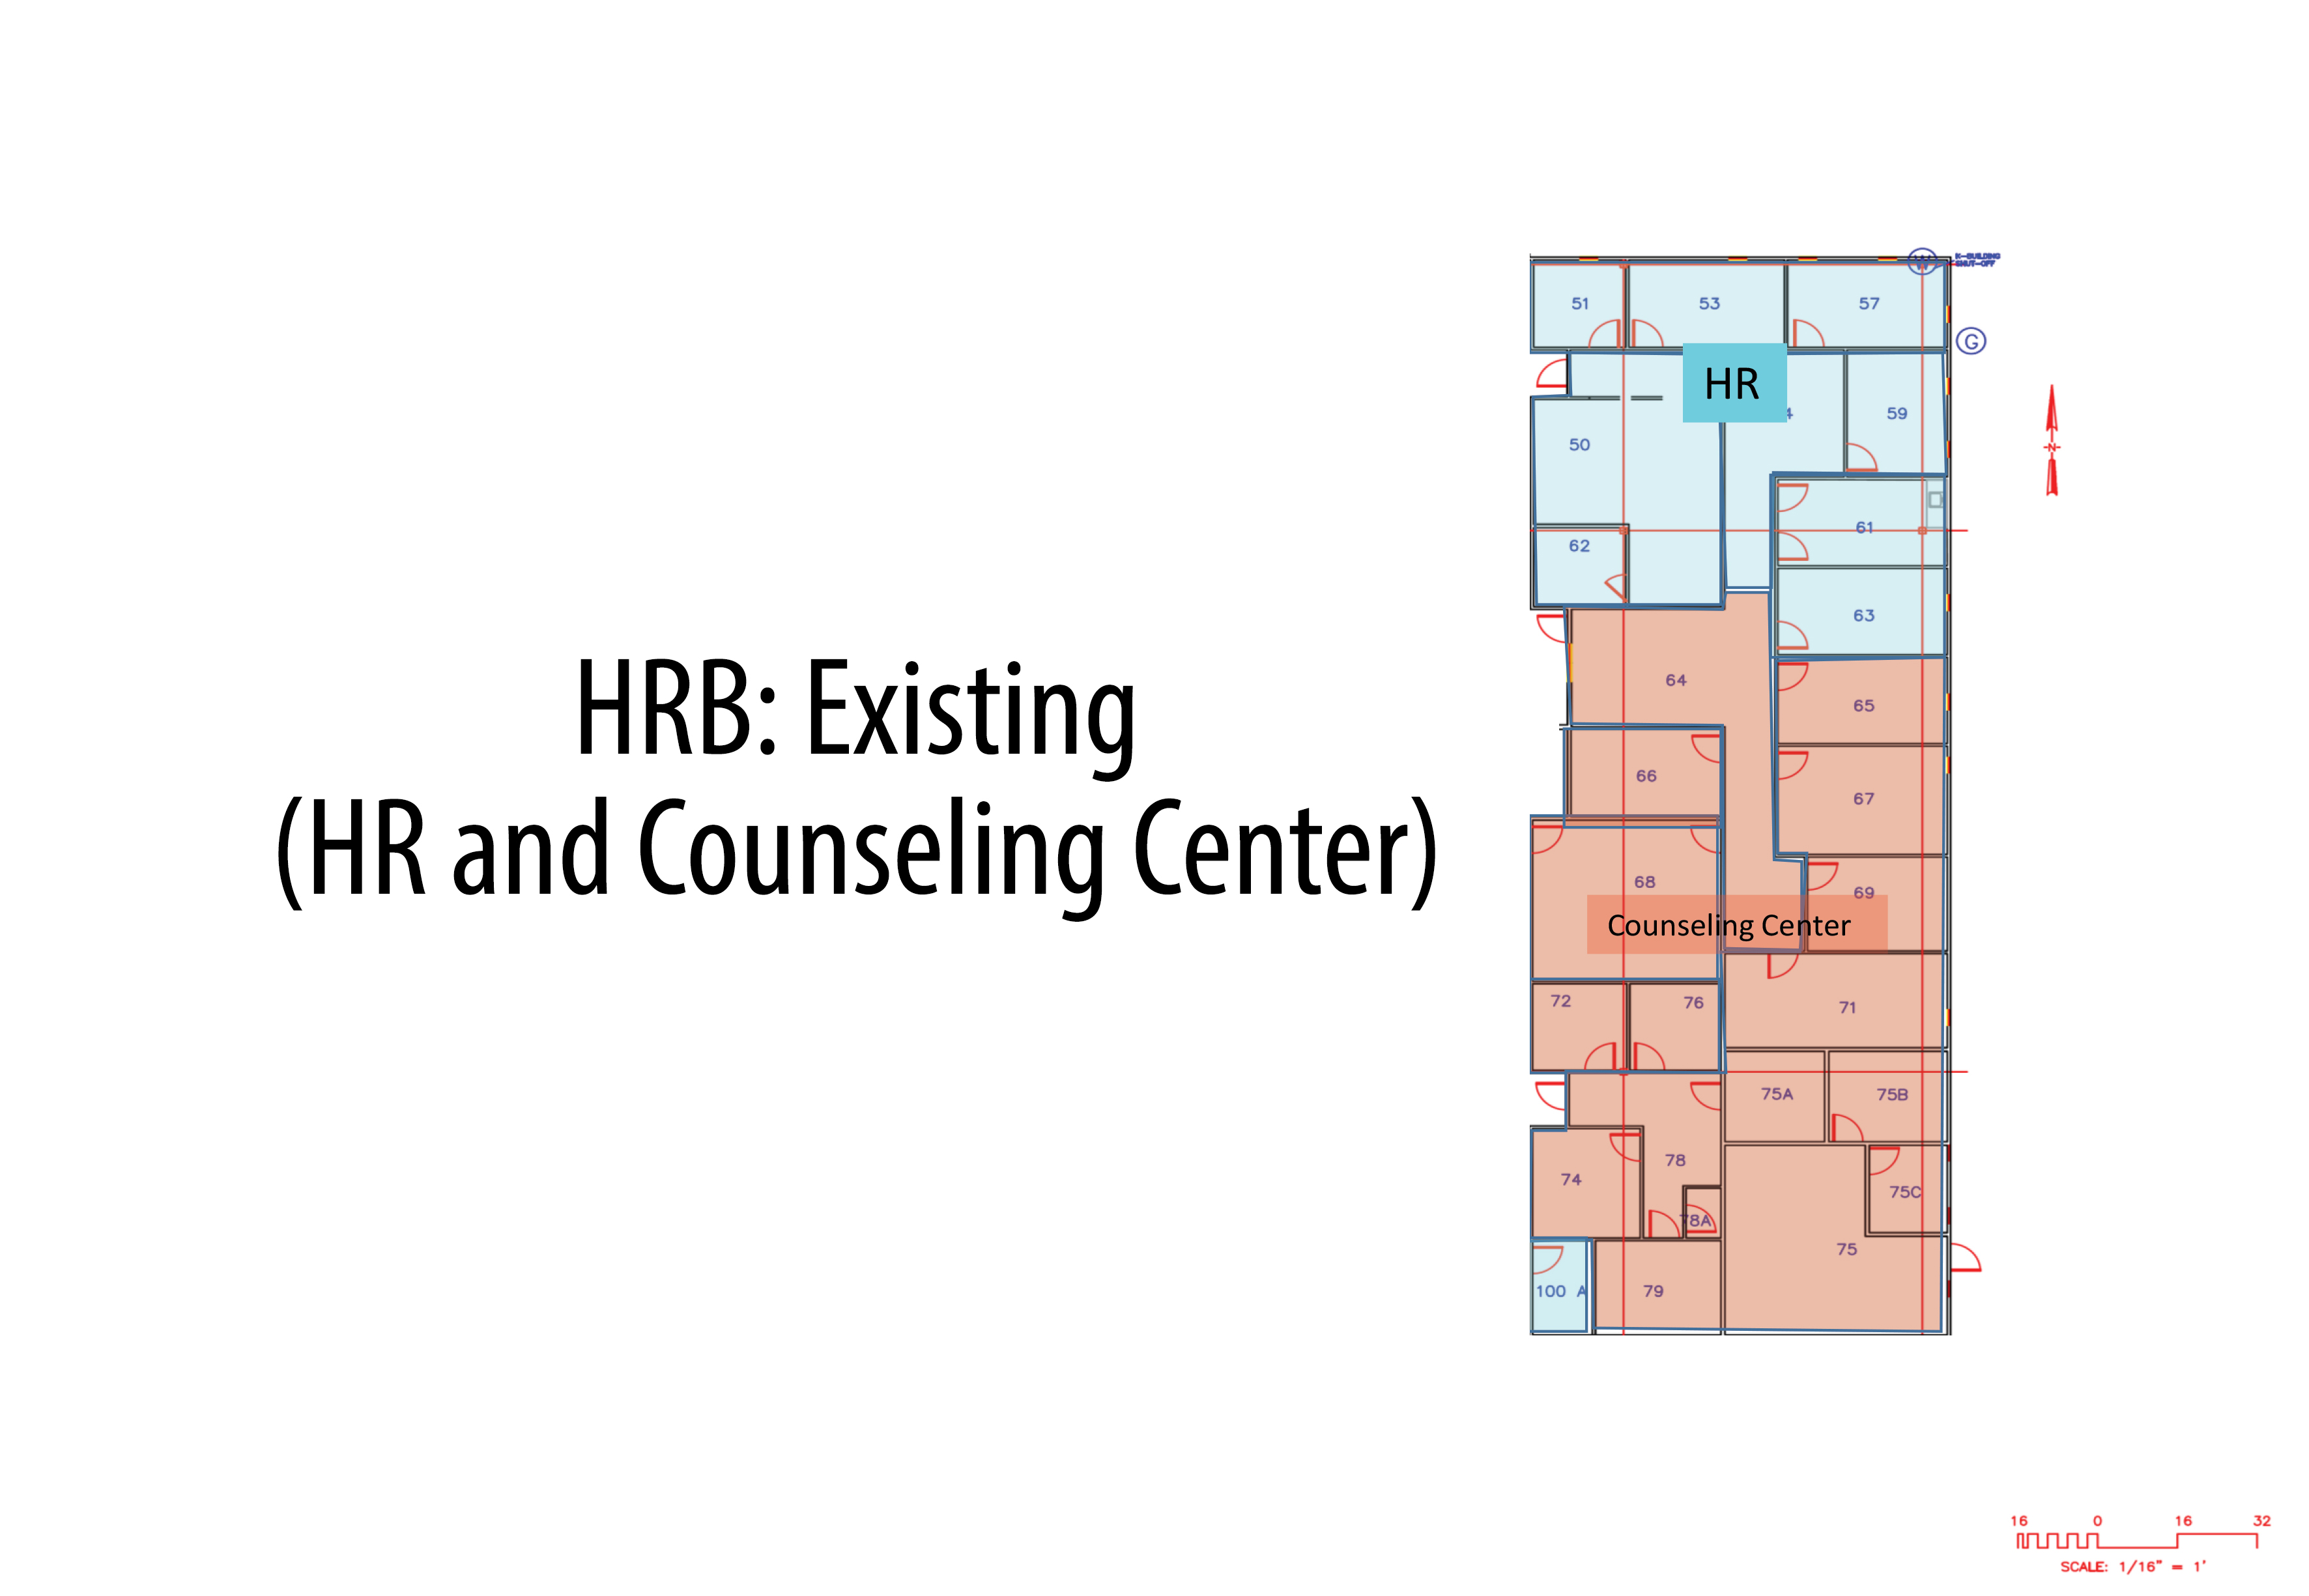 Current HRB Blueprint for HR and Counseling Center